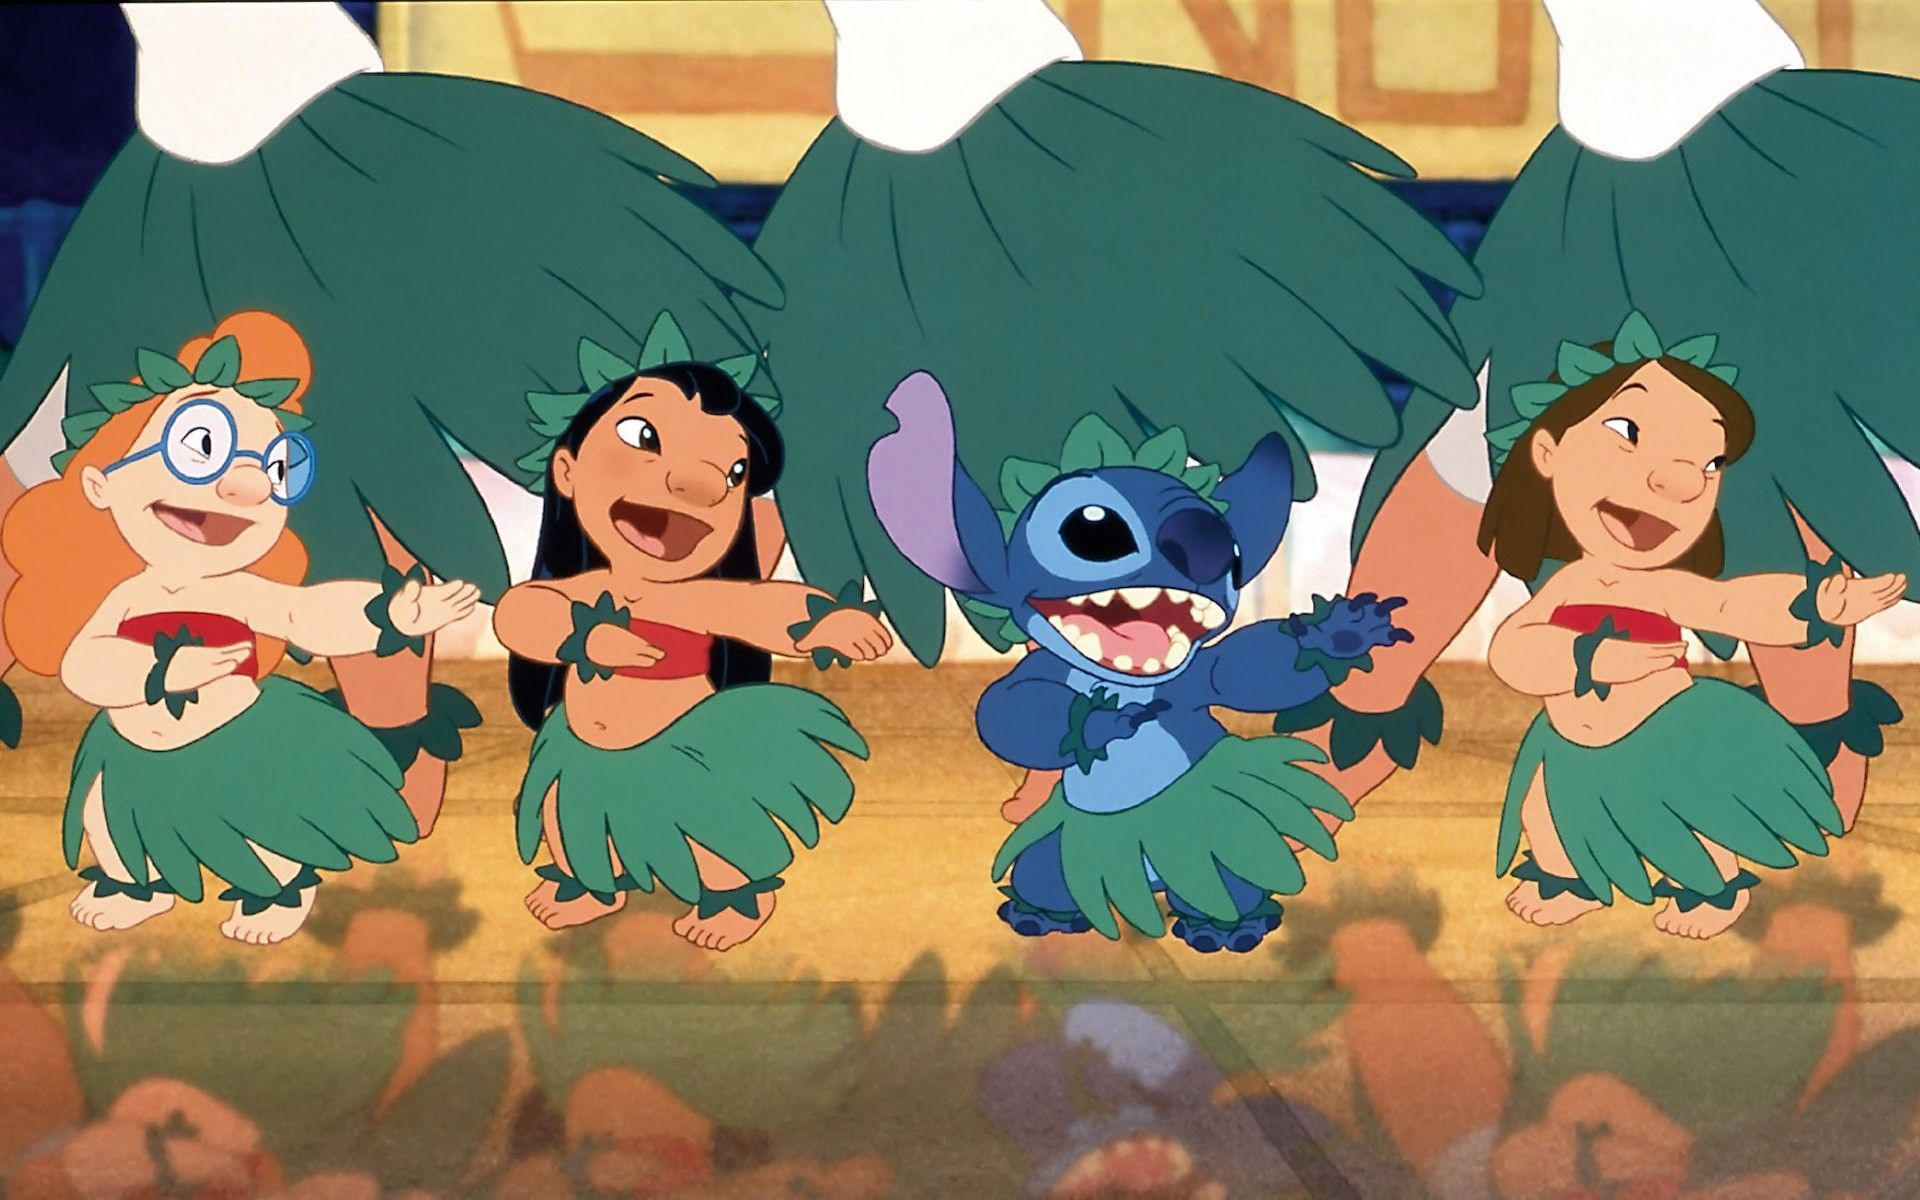 Lilo and her sisters dance in a field of flowers - Stitch